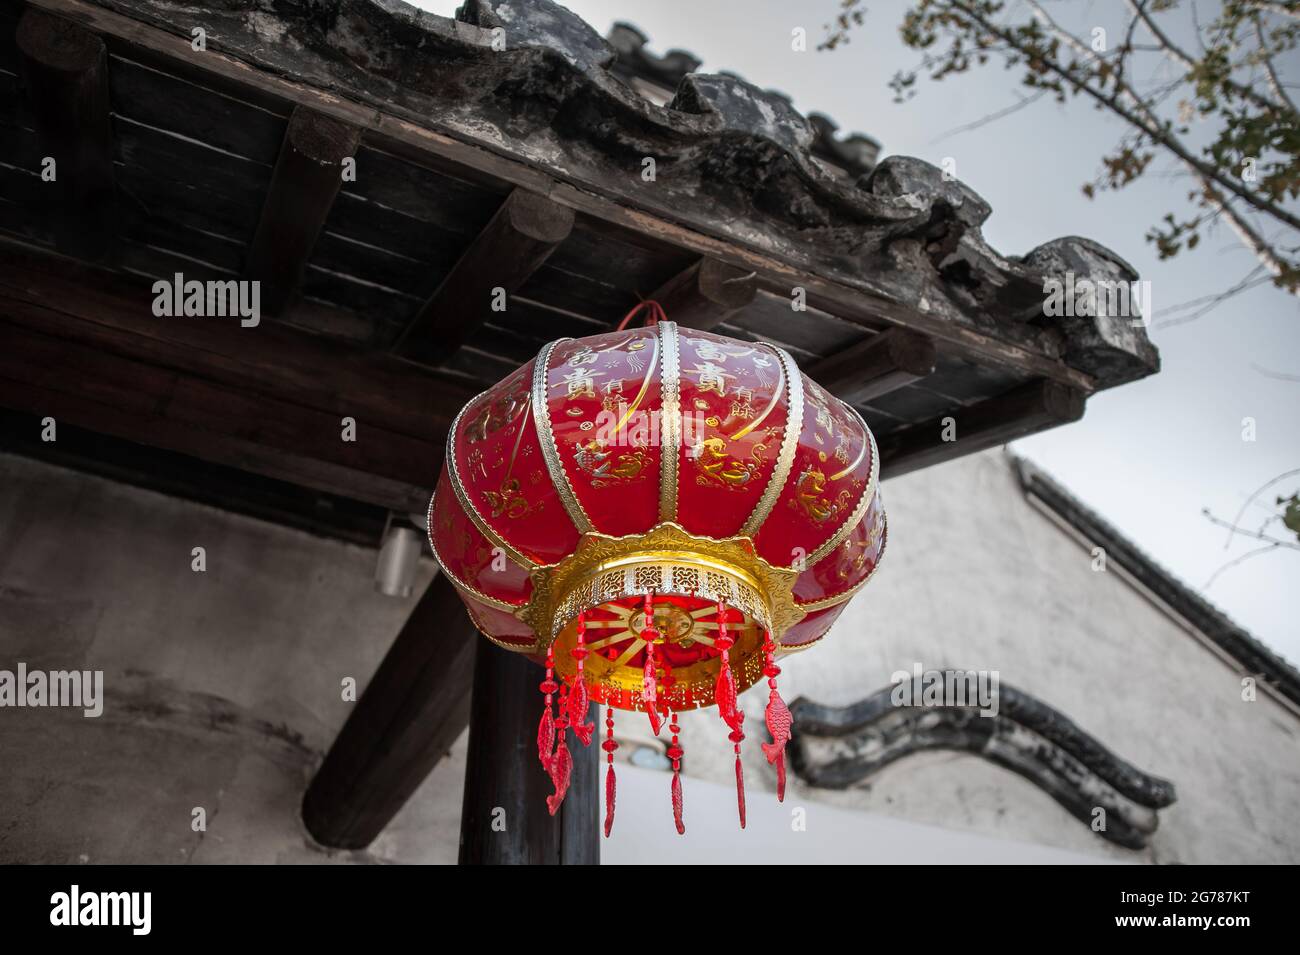 Jiangsu: Decorative chinese lantern hanging from an old building. These red lanterns are widely seen throughout China, often celebrating festivals Stock Photo